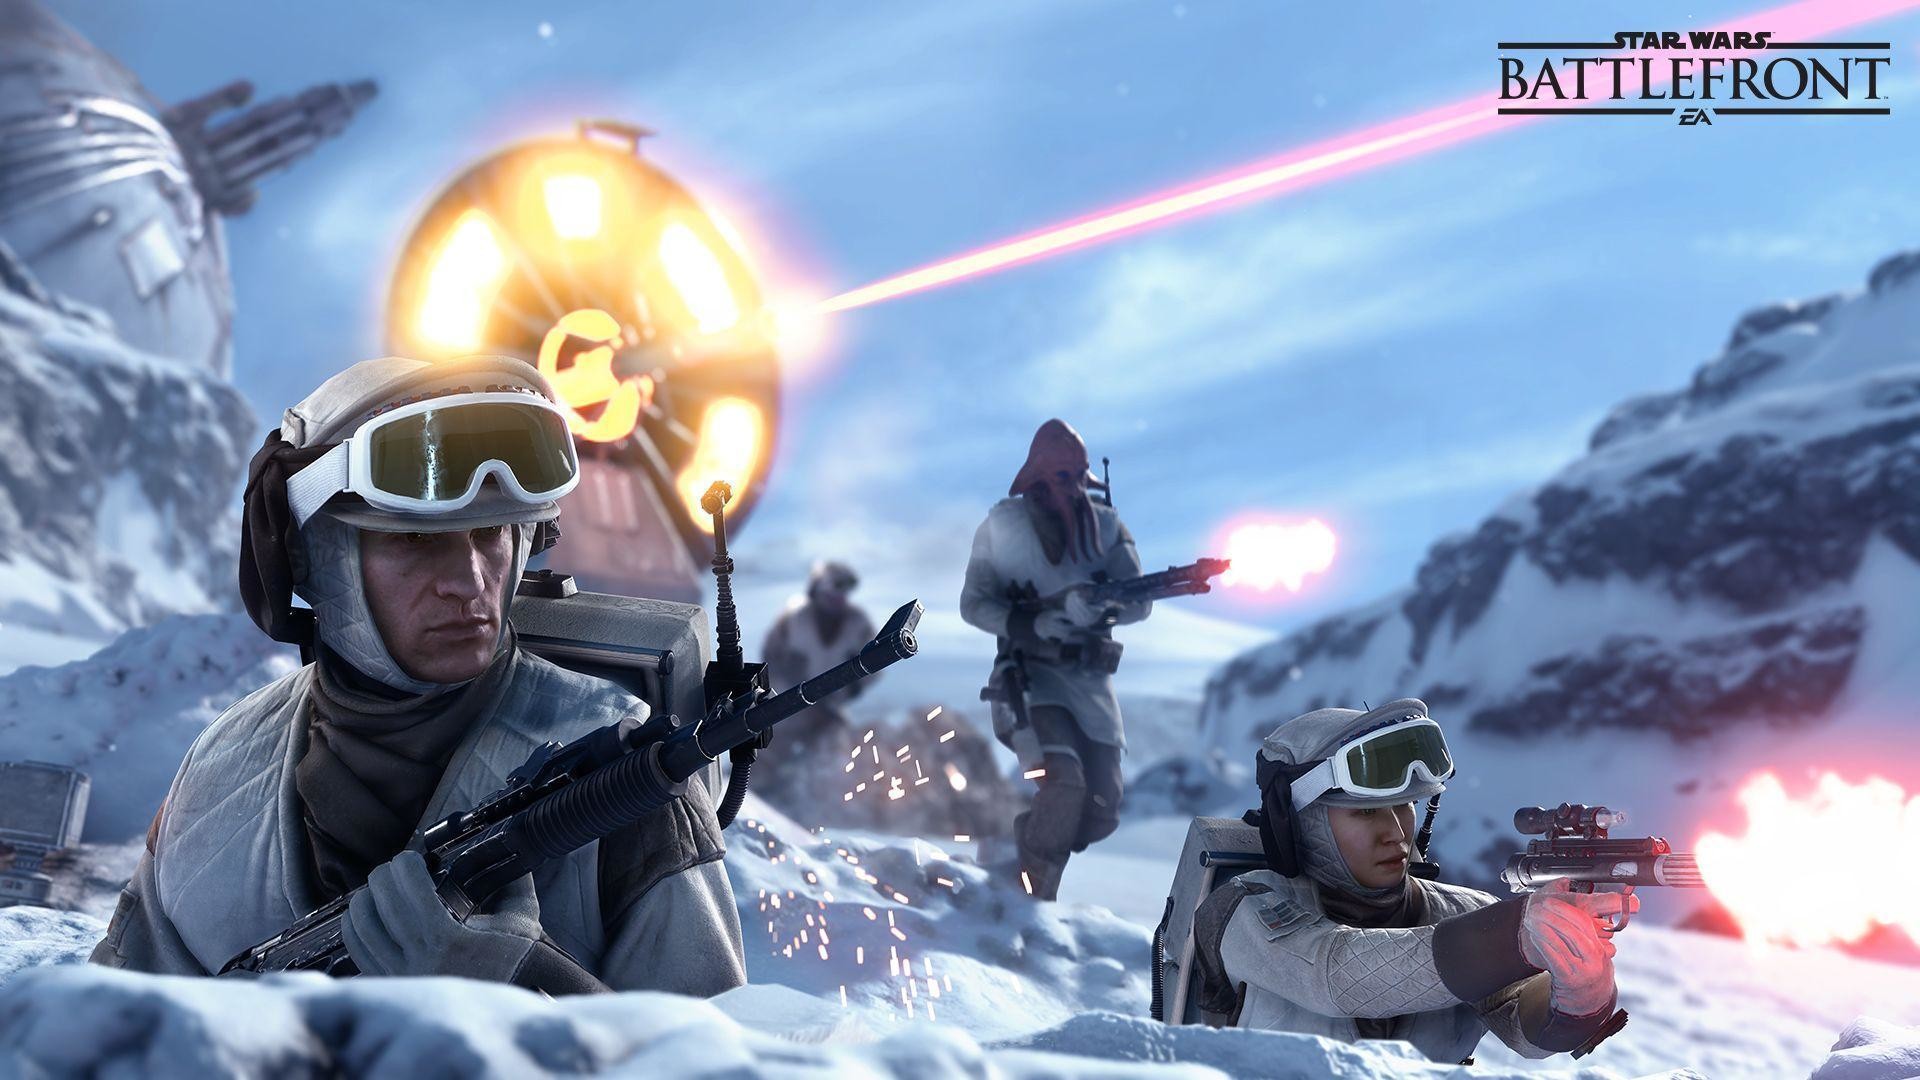 1920x1080 Star Wars Battlefront Wallpapers, Pictures, Images